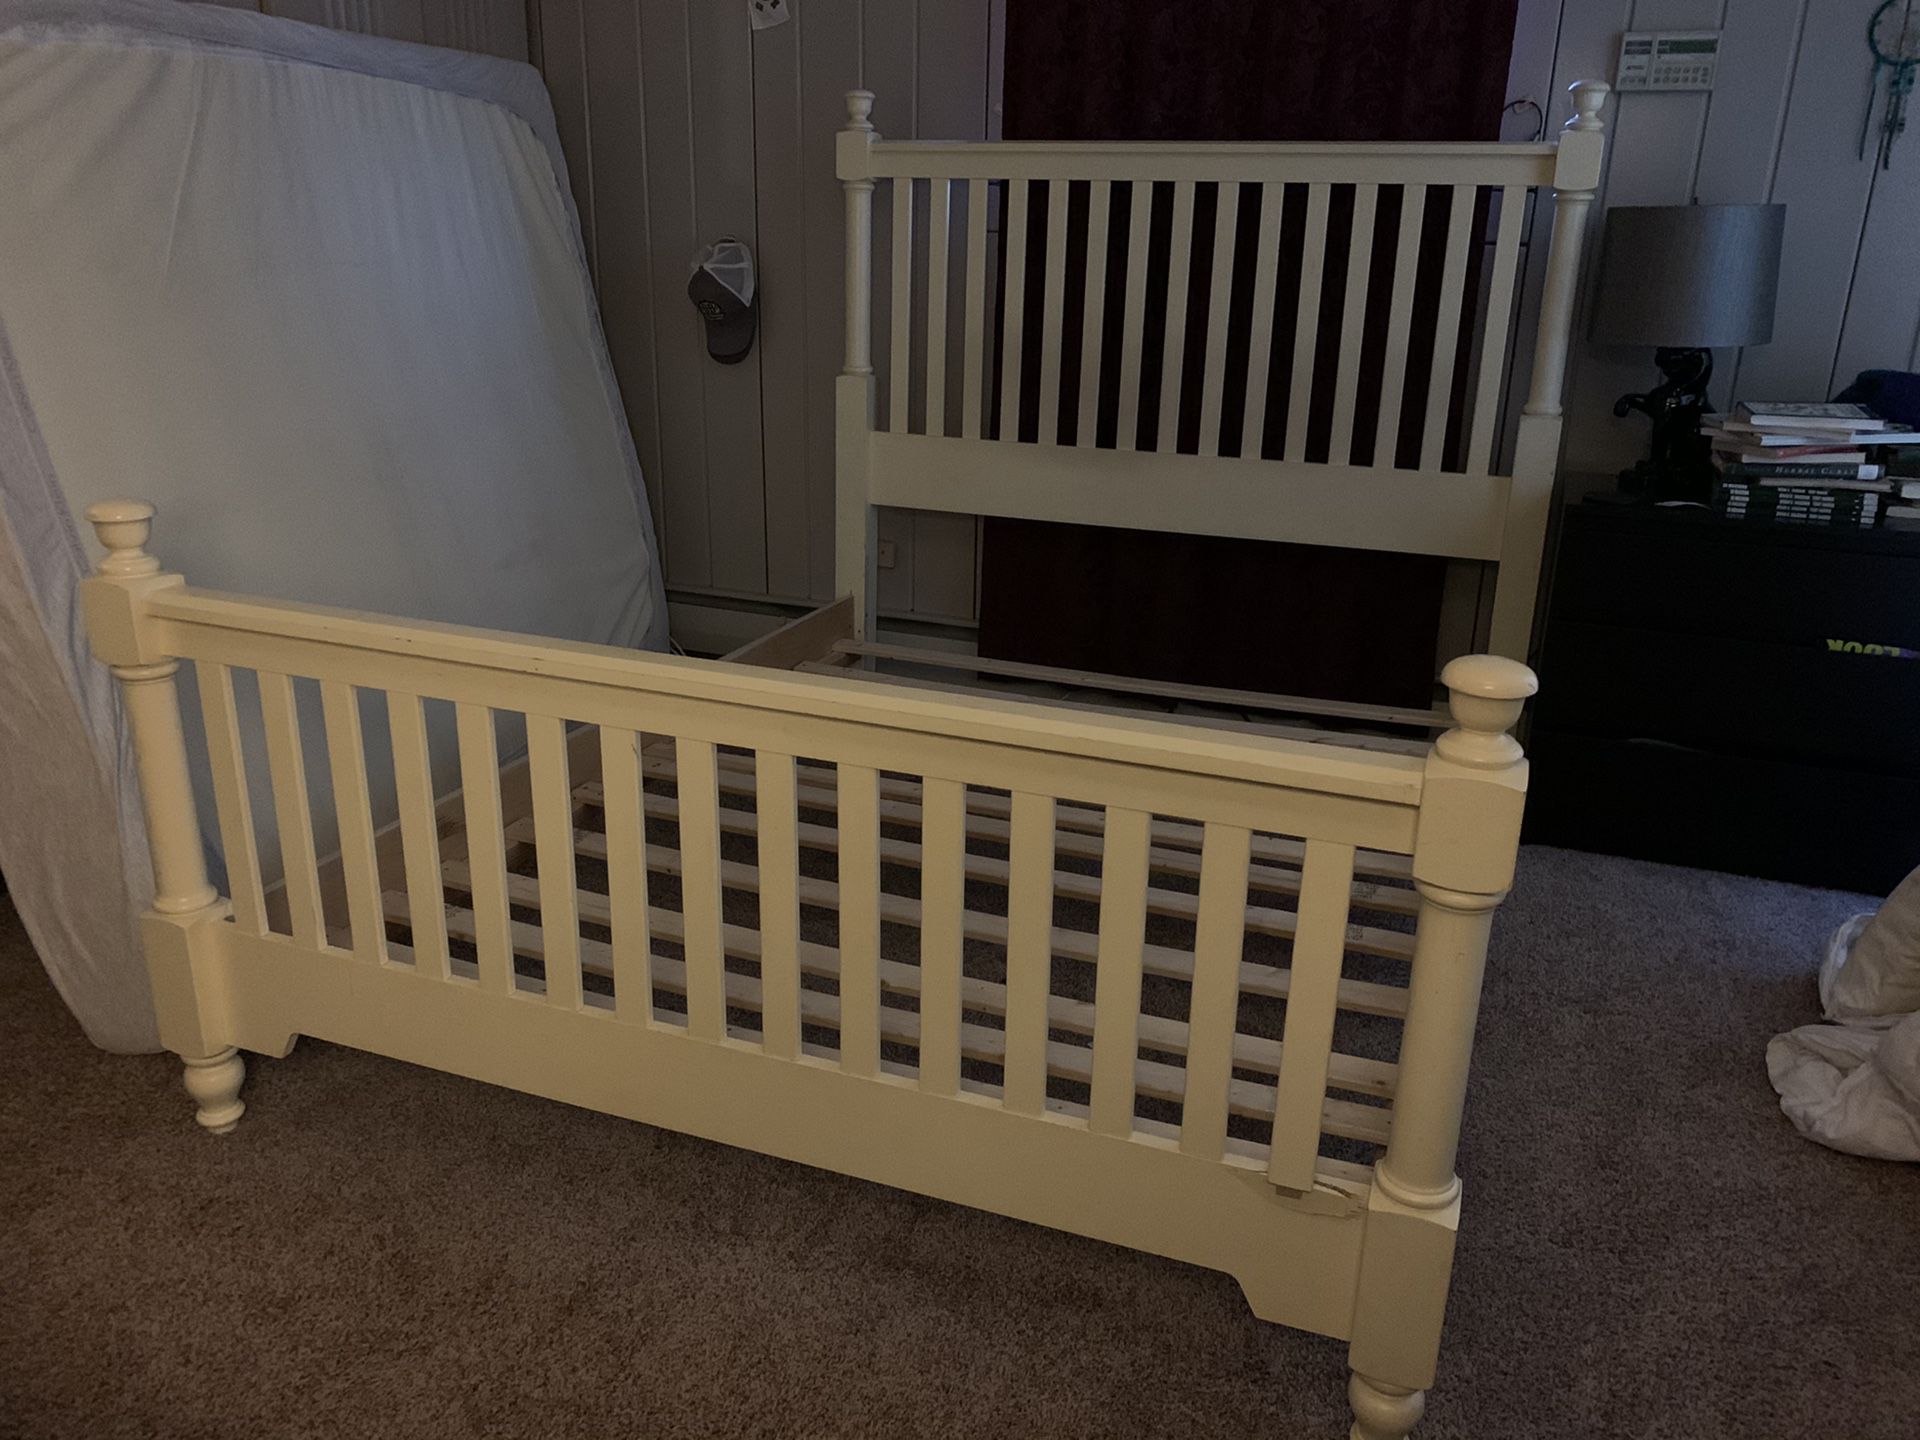 Selling a solid wood bed frame! Also have a Queen size 8” memory foam mattress and two pc foundation